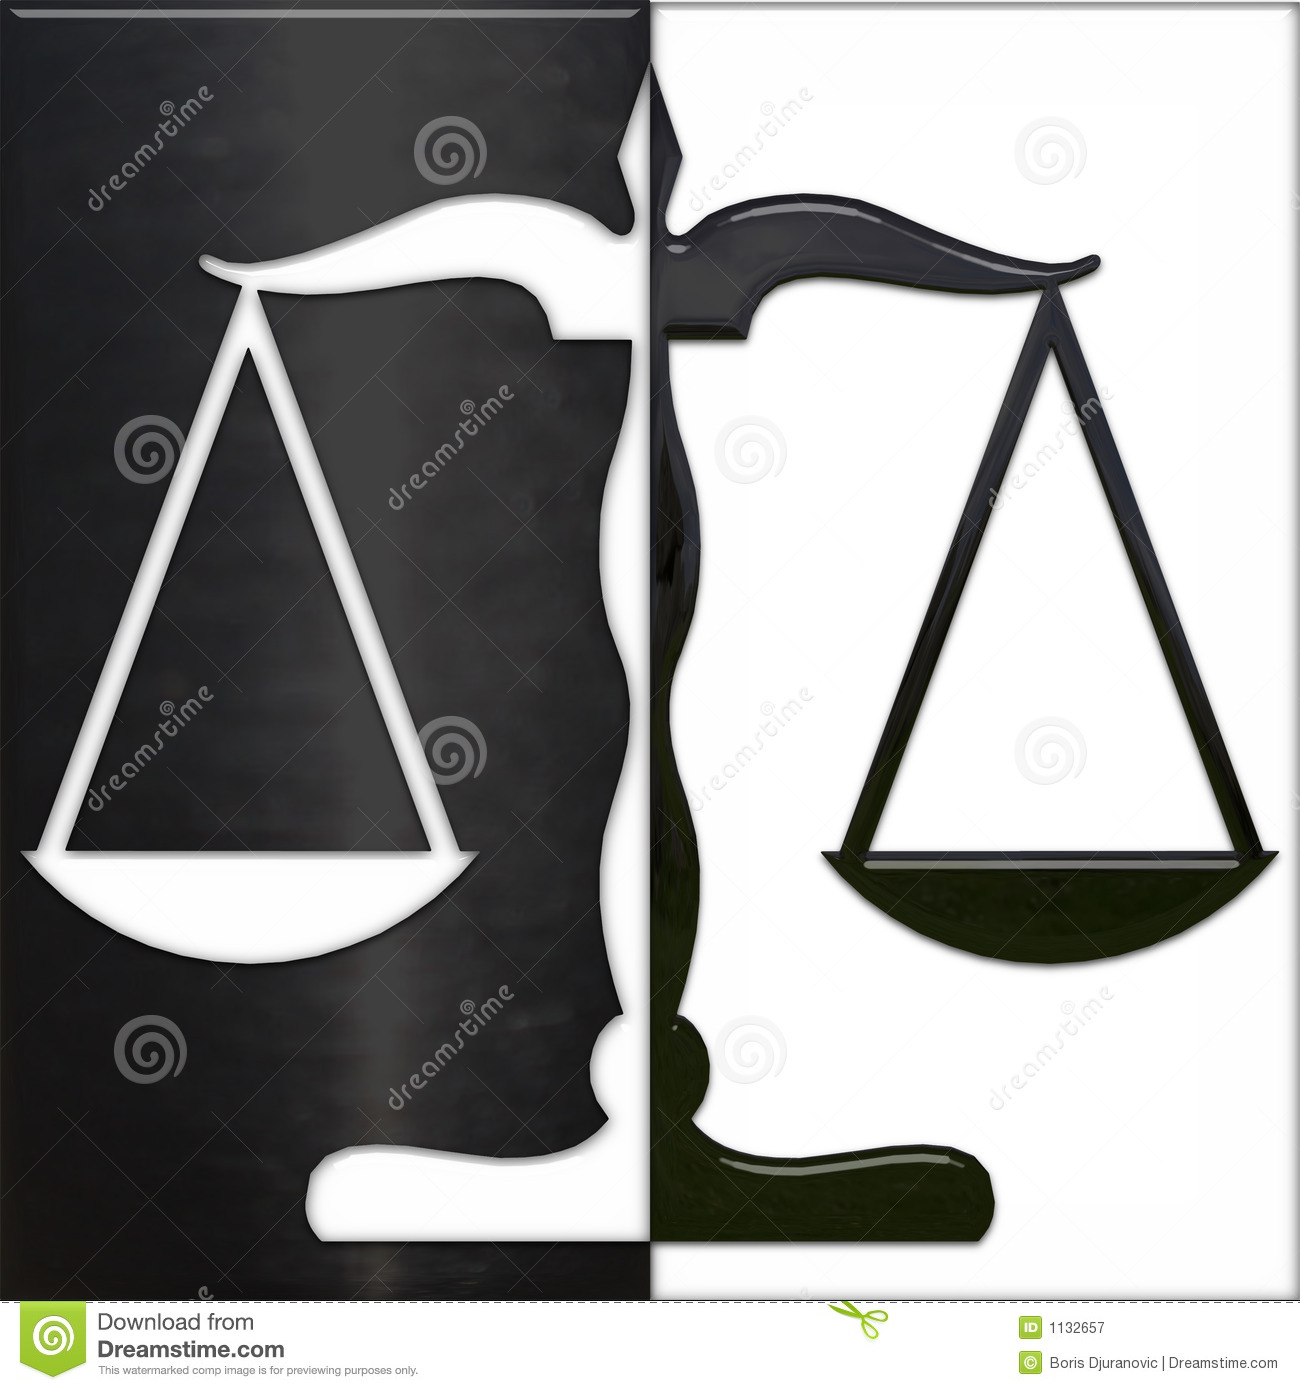 Scale Of Justice Black And White Royalty Free Stock Photography    